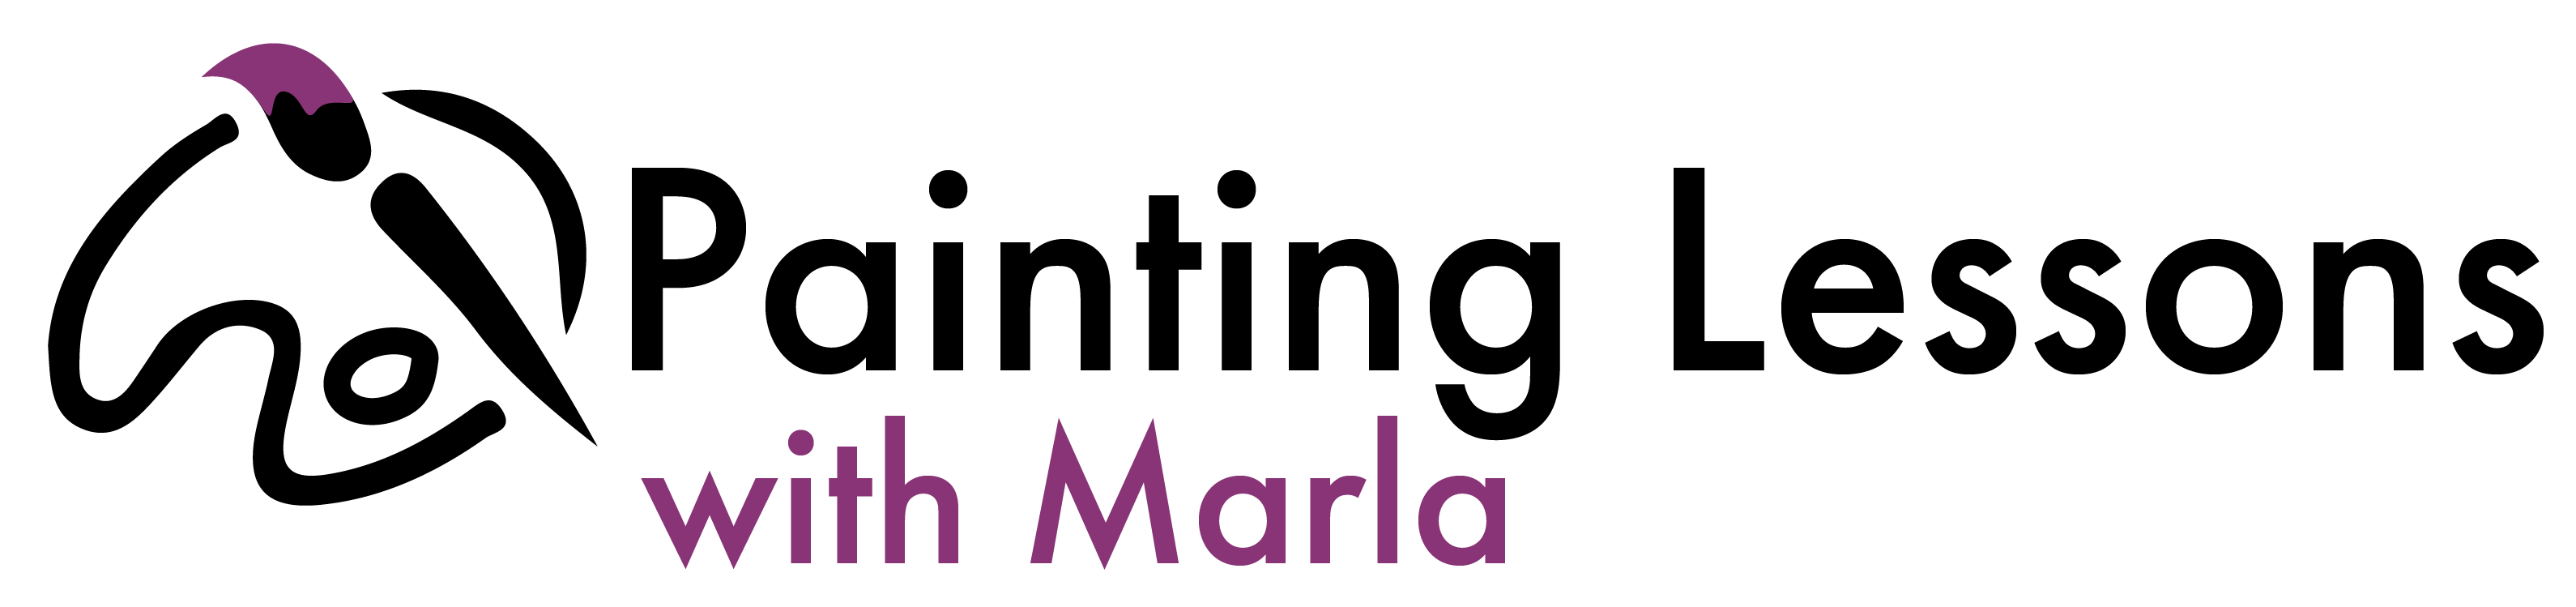 Painting Lessons with Marla logo